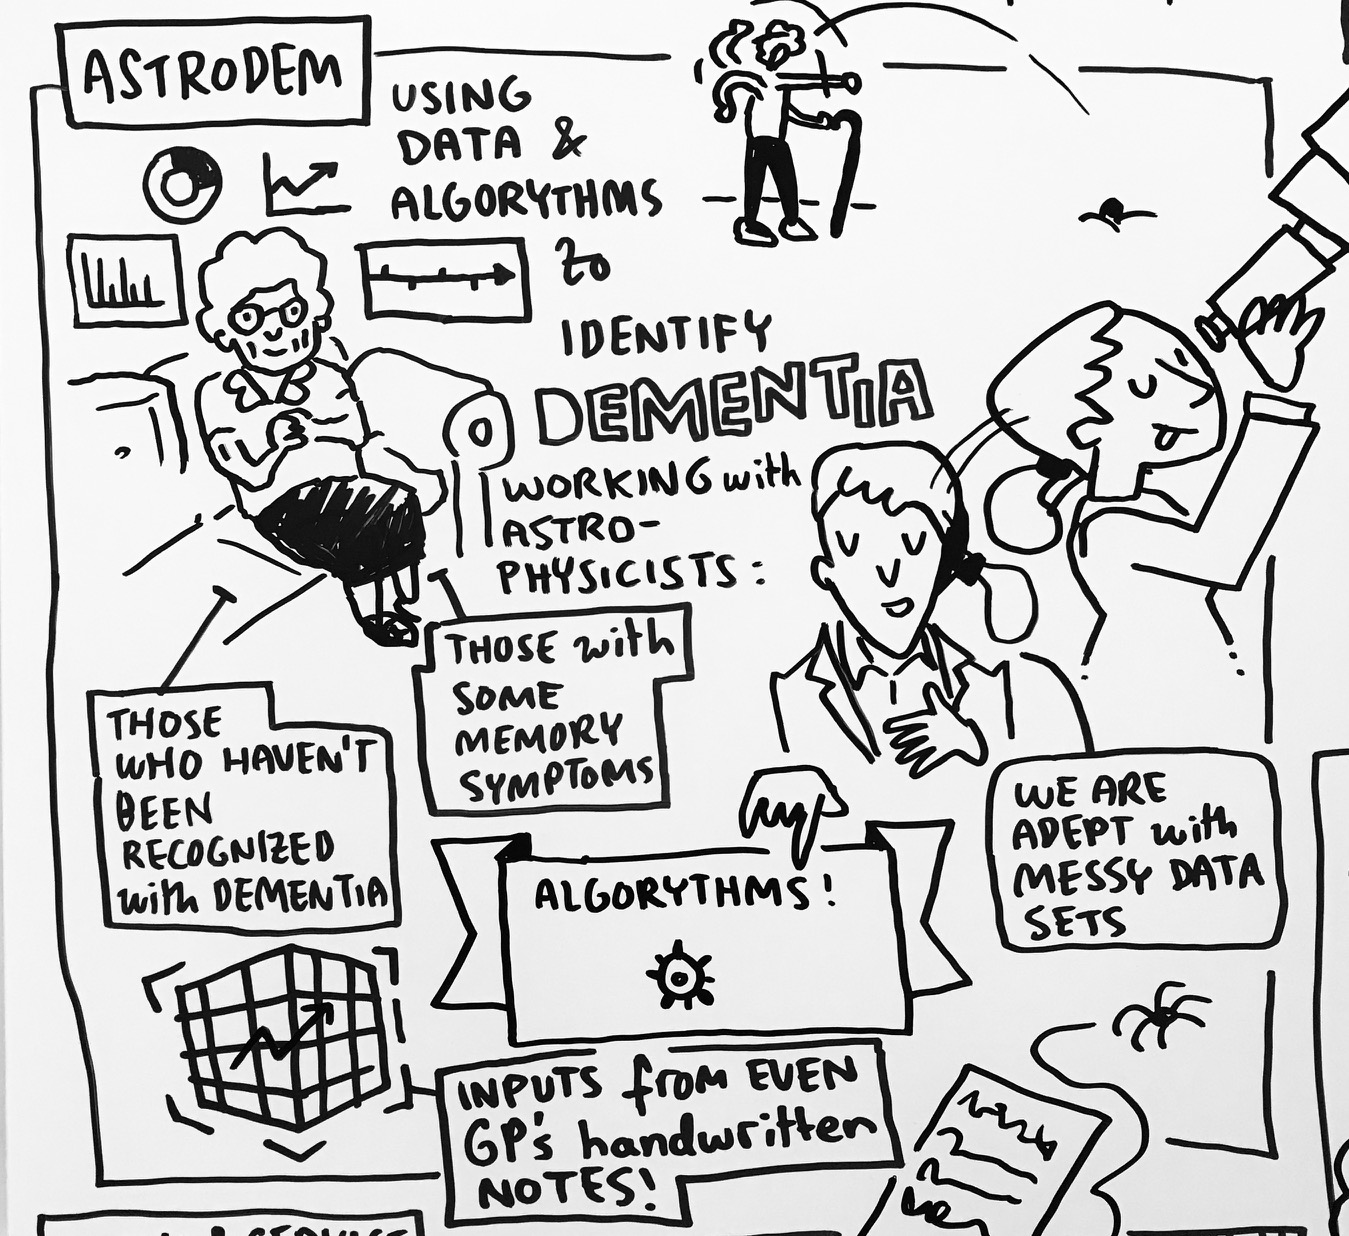 Cartoon of the proceedings capturing presentations and discussions at the ASTRODERM meeting